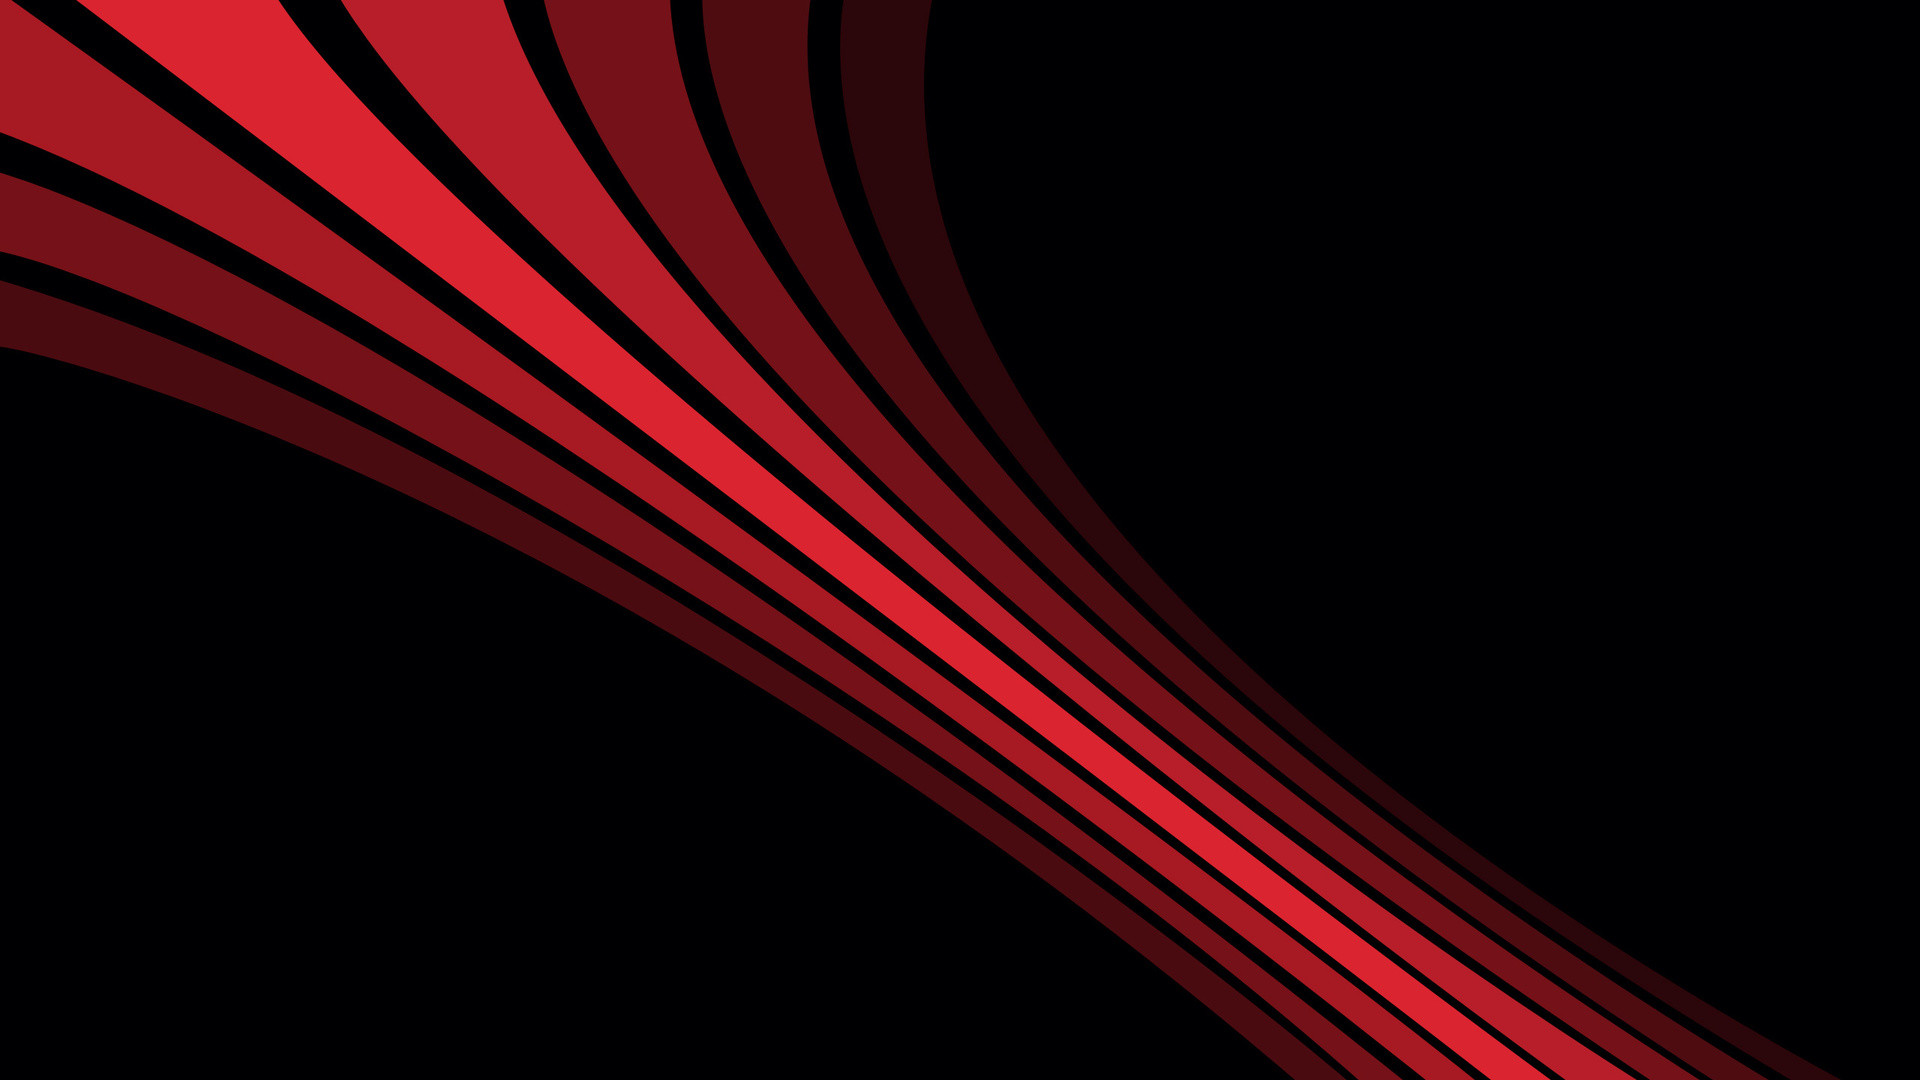 1920x1080 Black And Red Honda Logo. pictures-black-red-stripes-wal-